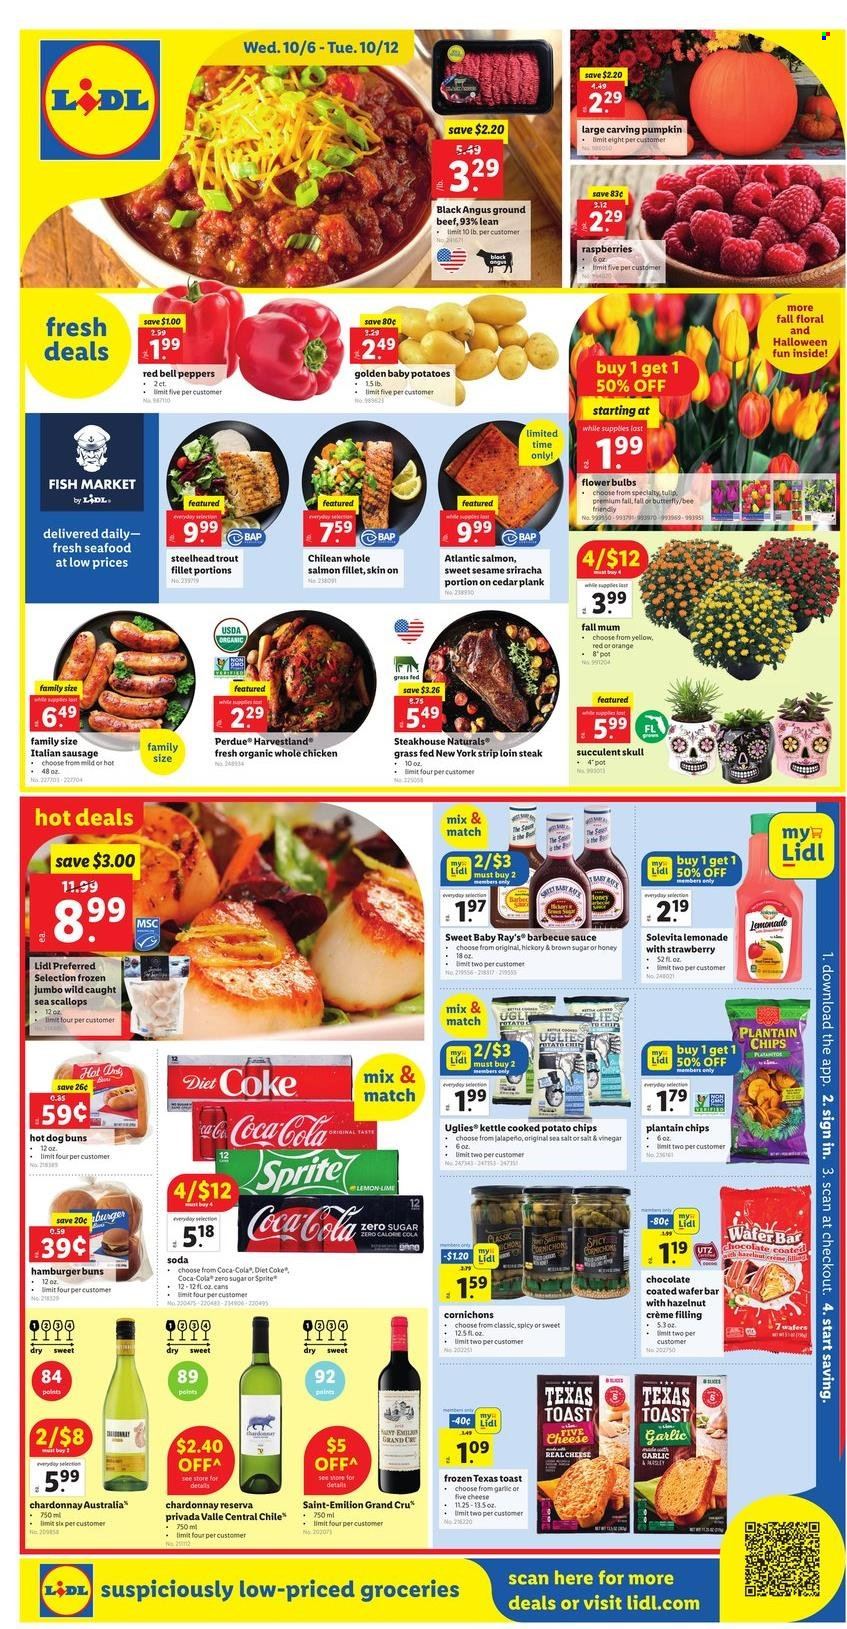 thumbnail - Lidl Flyer - 10/06/2021 - 10/12/2021 - Sales products - buns, burger buns, bell peppers, garlic, pumpkin, peppers, jalapeño, oranges, salmon, salmon fillet, scallops, seafood, sauce, Perdue®, sausage, italian sausage, cheese, wafers, chocolate, potato chips, cane sugar, BBQ sauce, sriracha, Coca-Cola, lemonade, Sprite, Diet Coke, soda, white wine, Chardonnay, whole chicken, beef meat, ground beef, steak, Mum, lid, pot, Halloween, succulent. Page 1.